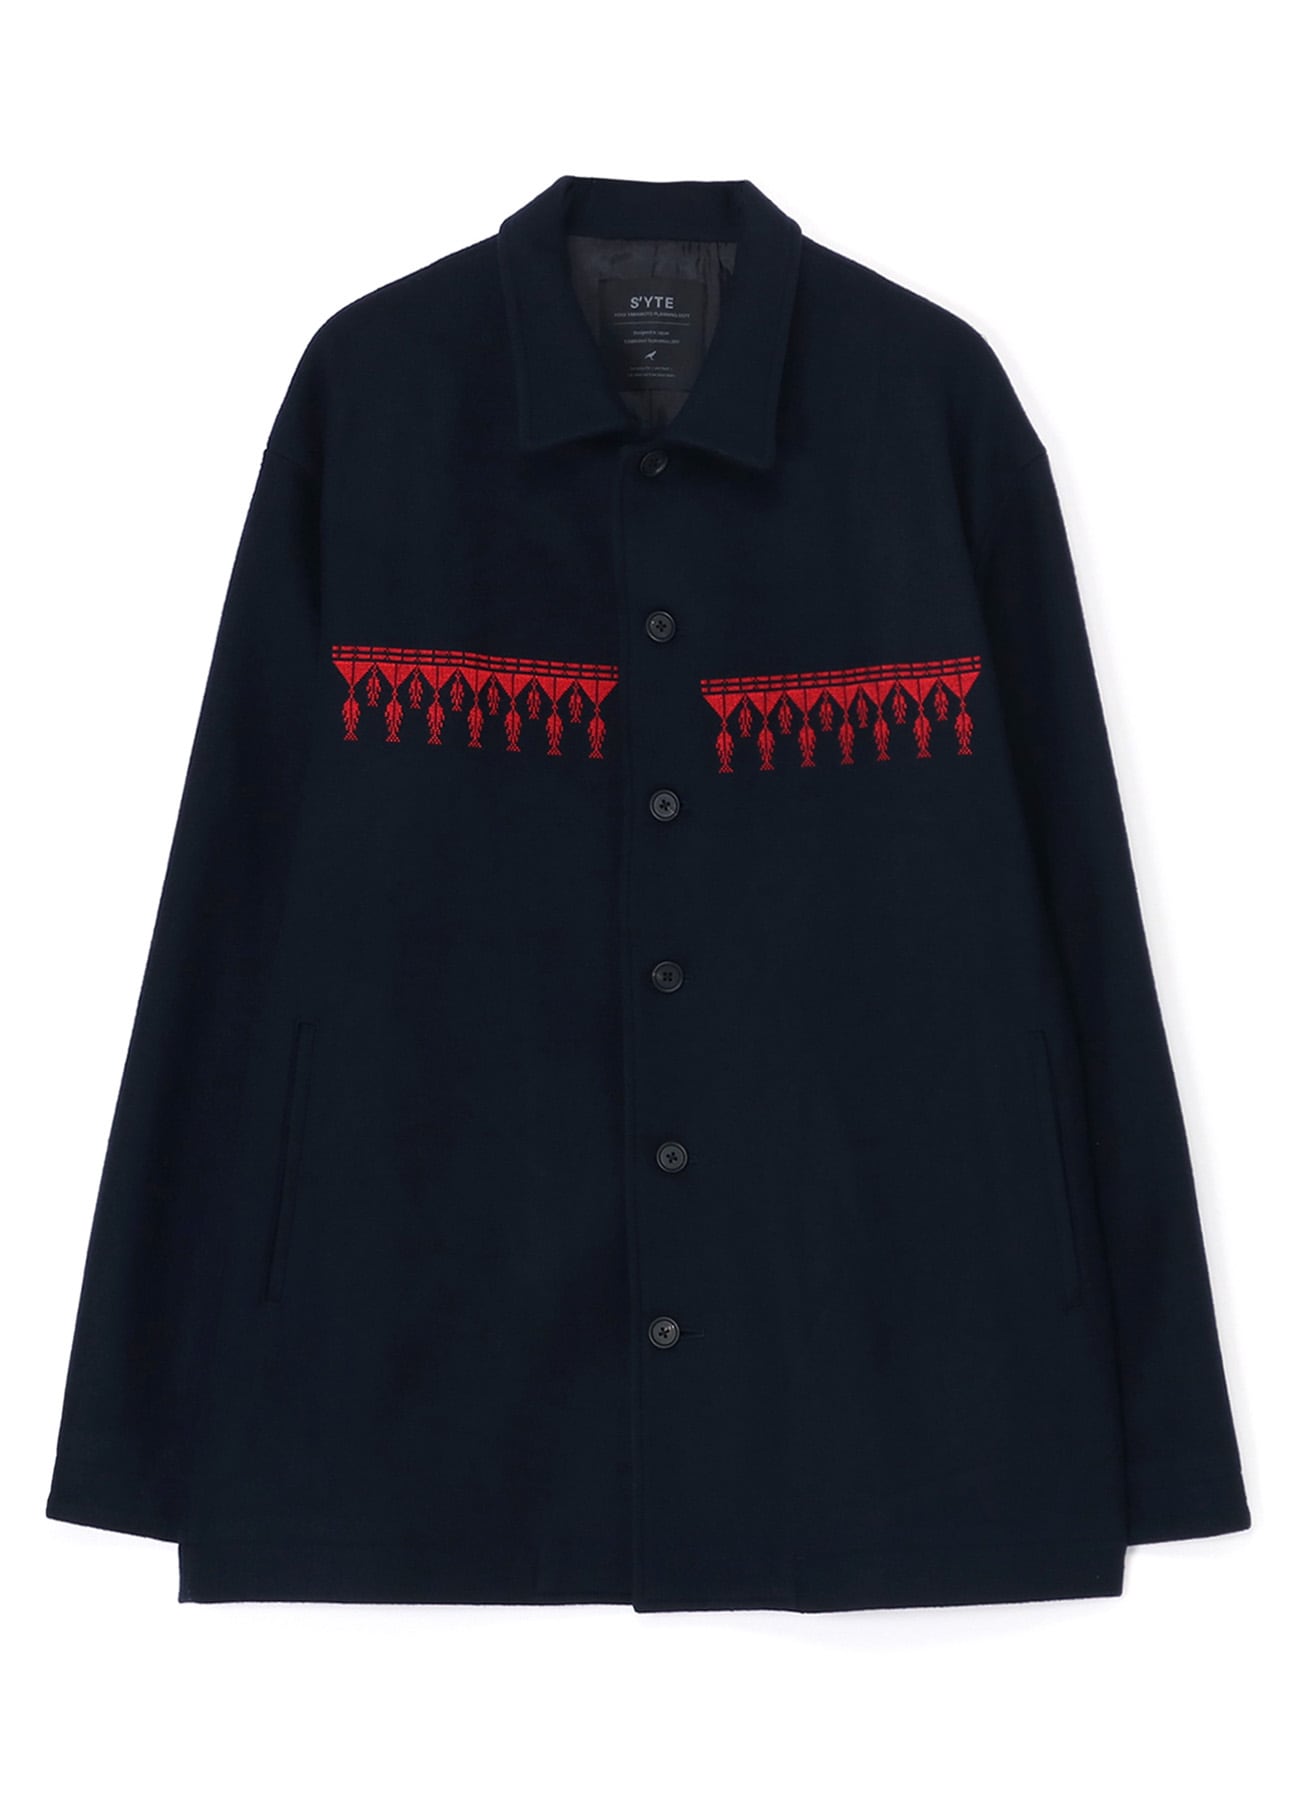 COMPRESSED JERSEY ETHNIC EMBROIDERED BLOUSON(M Navy): S'YTE｜THE 